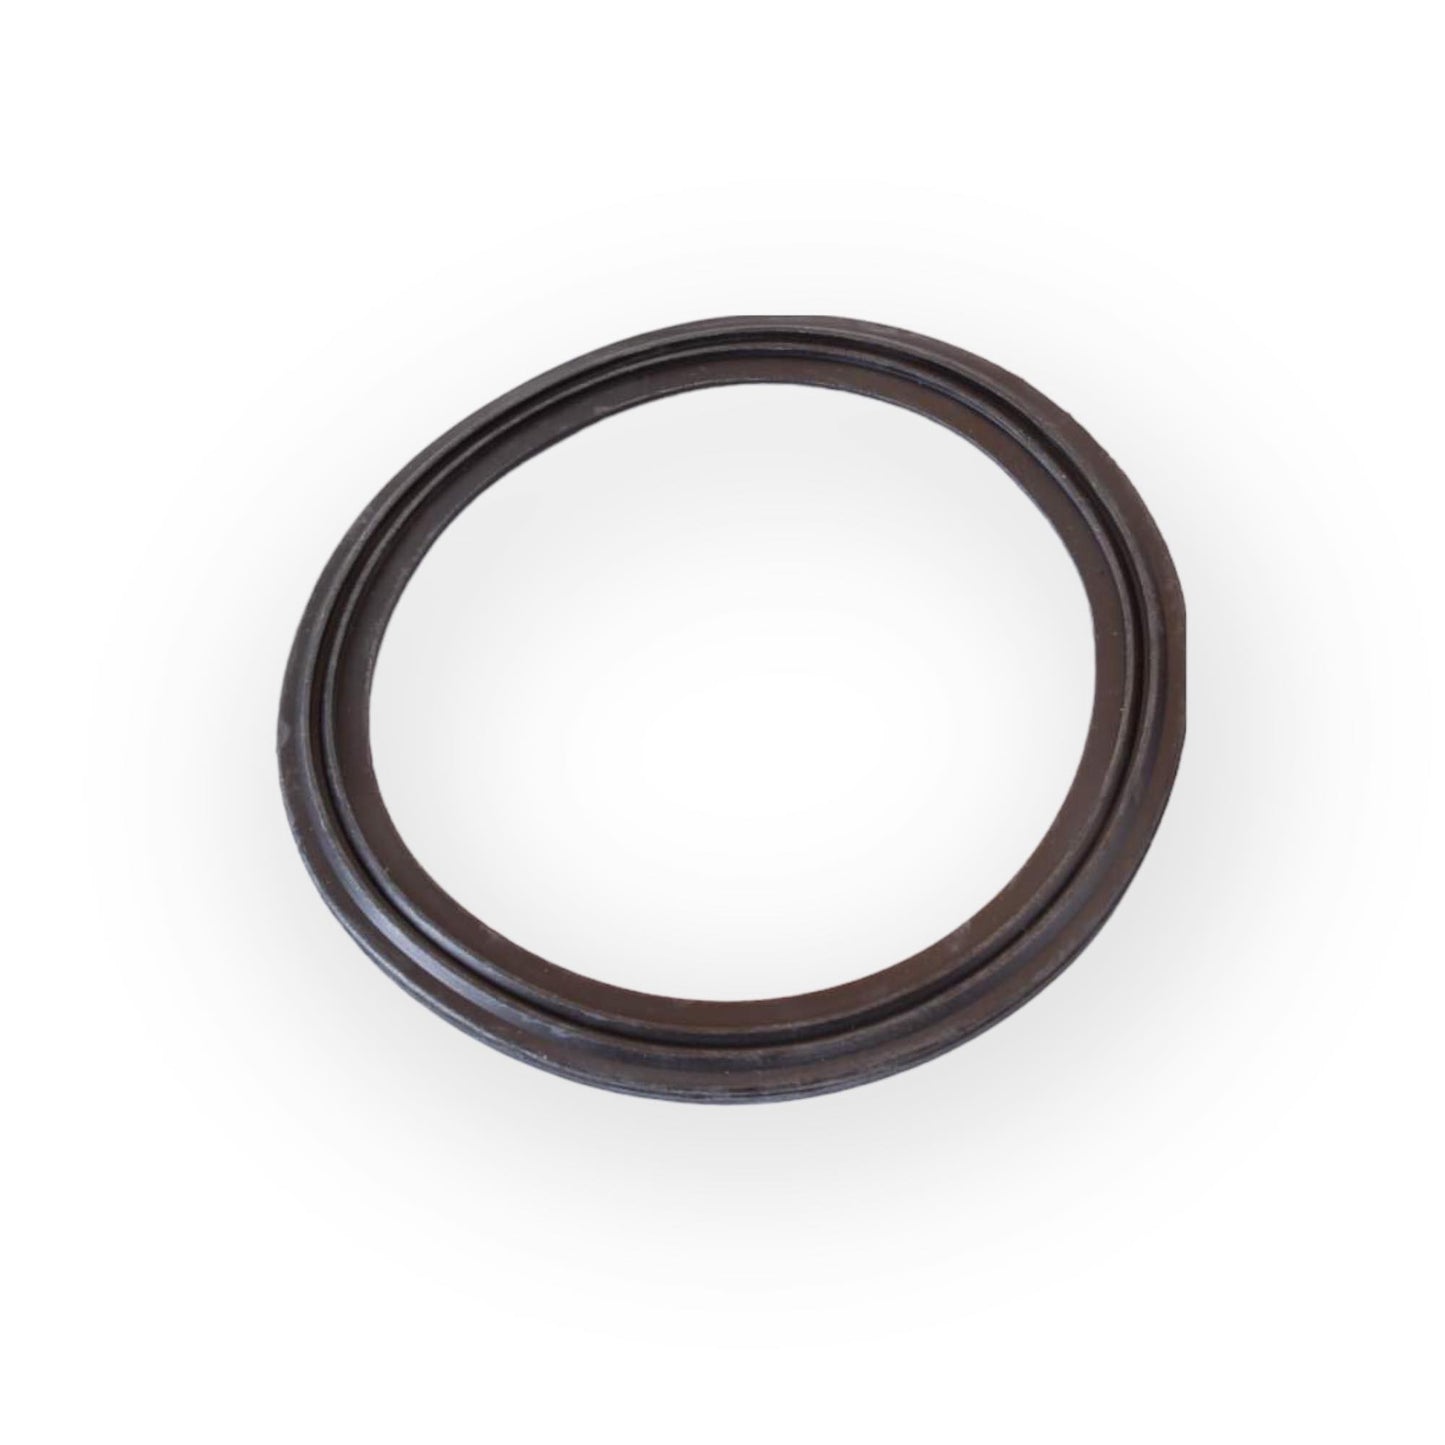 60533750 Fuel tank rubber seal gasket for Alfa Romeo 75, SZ and RZ